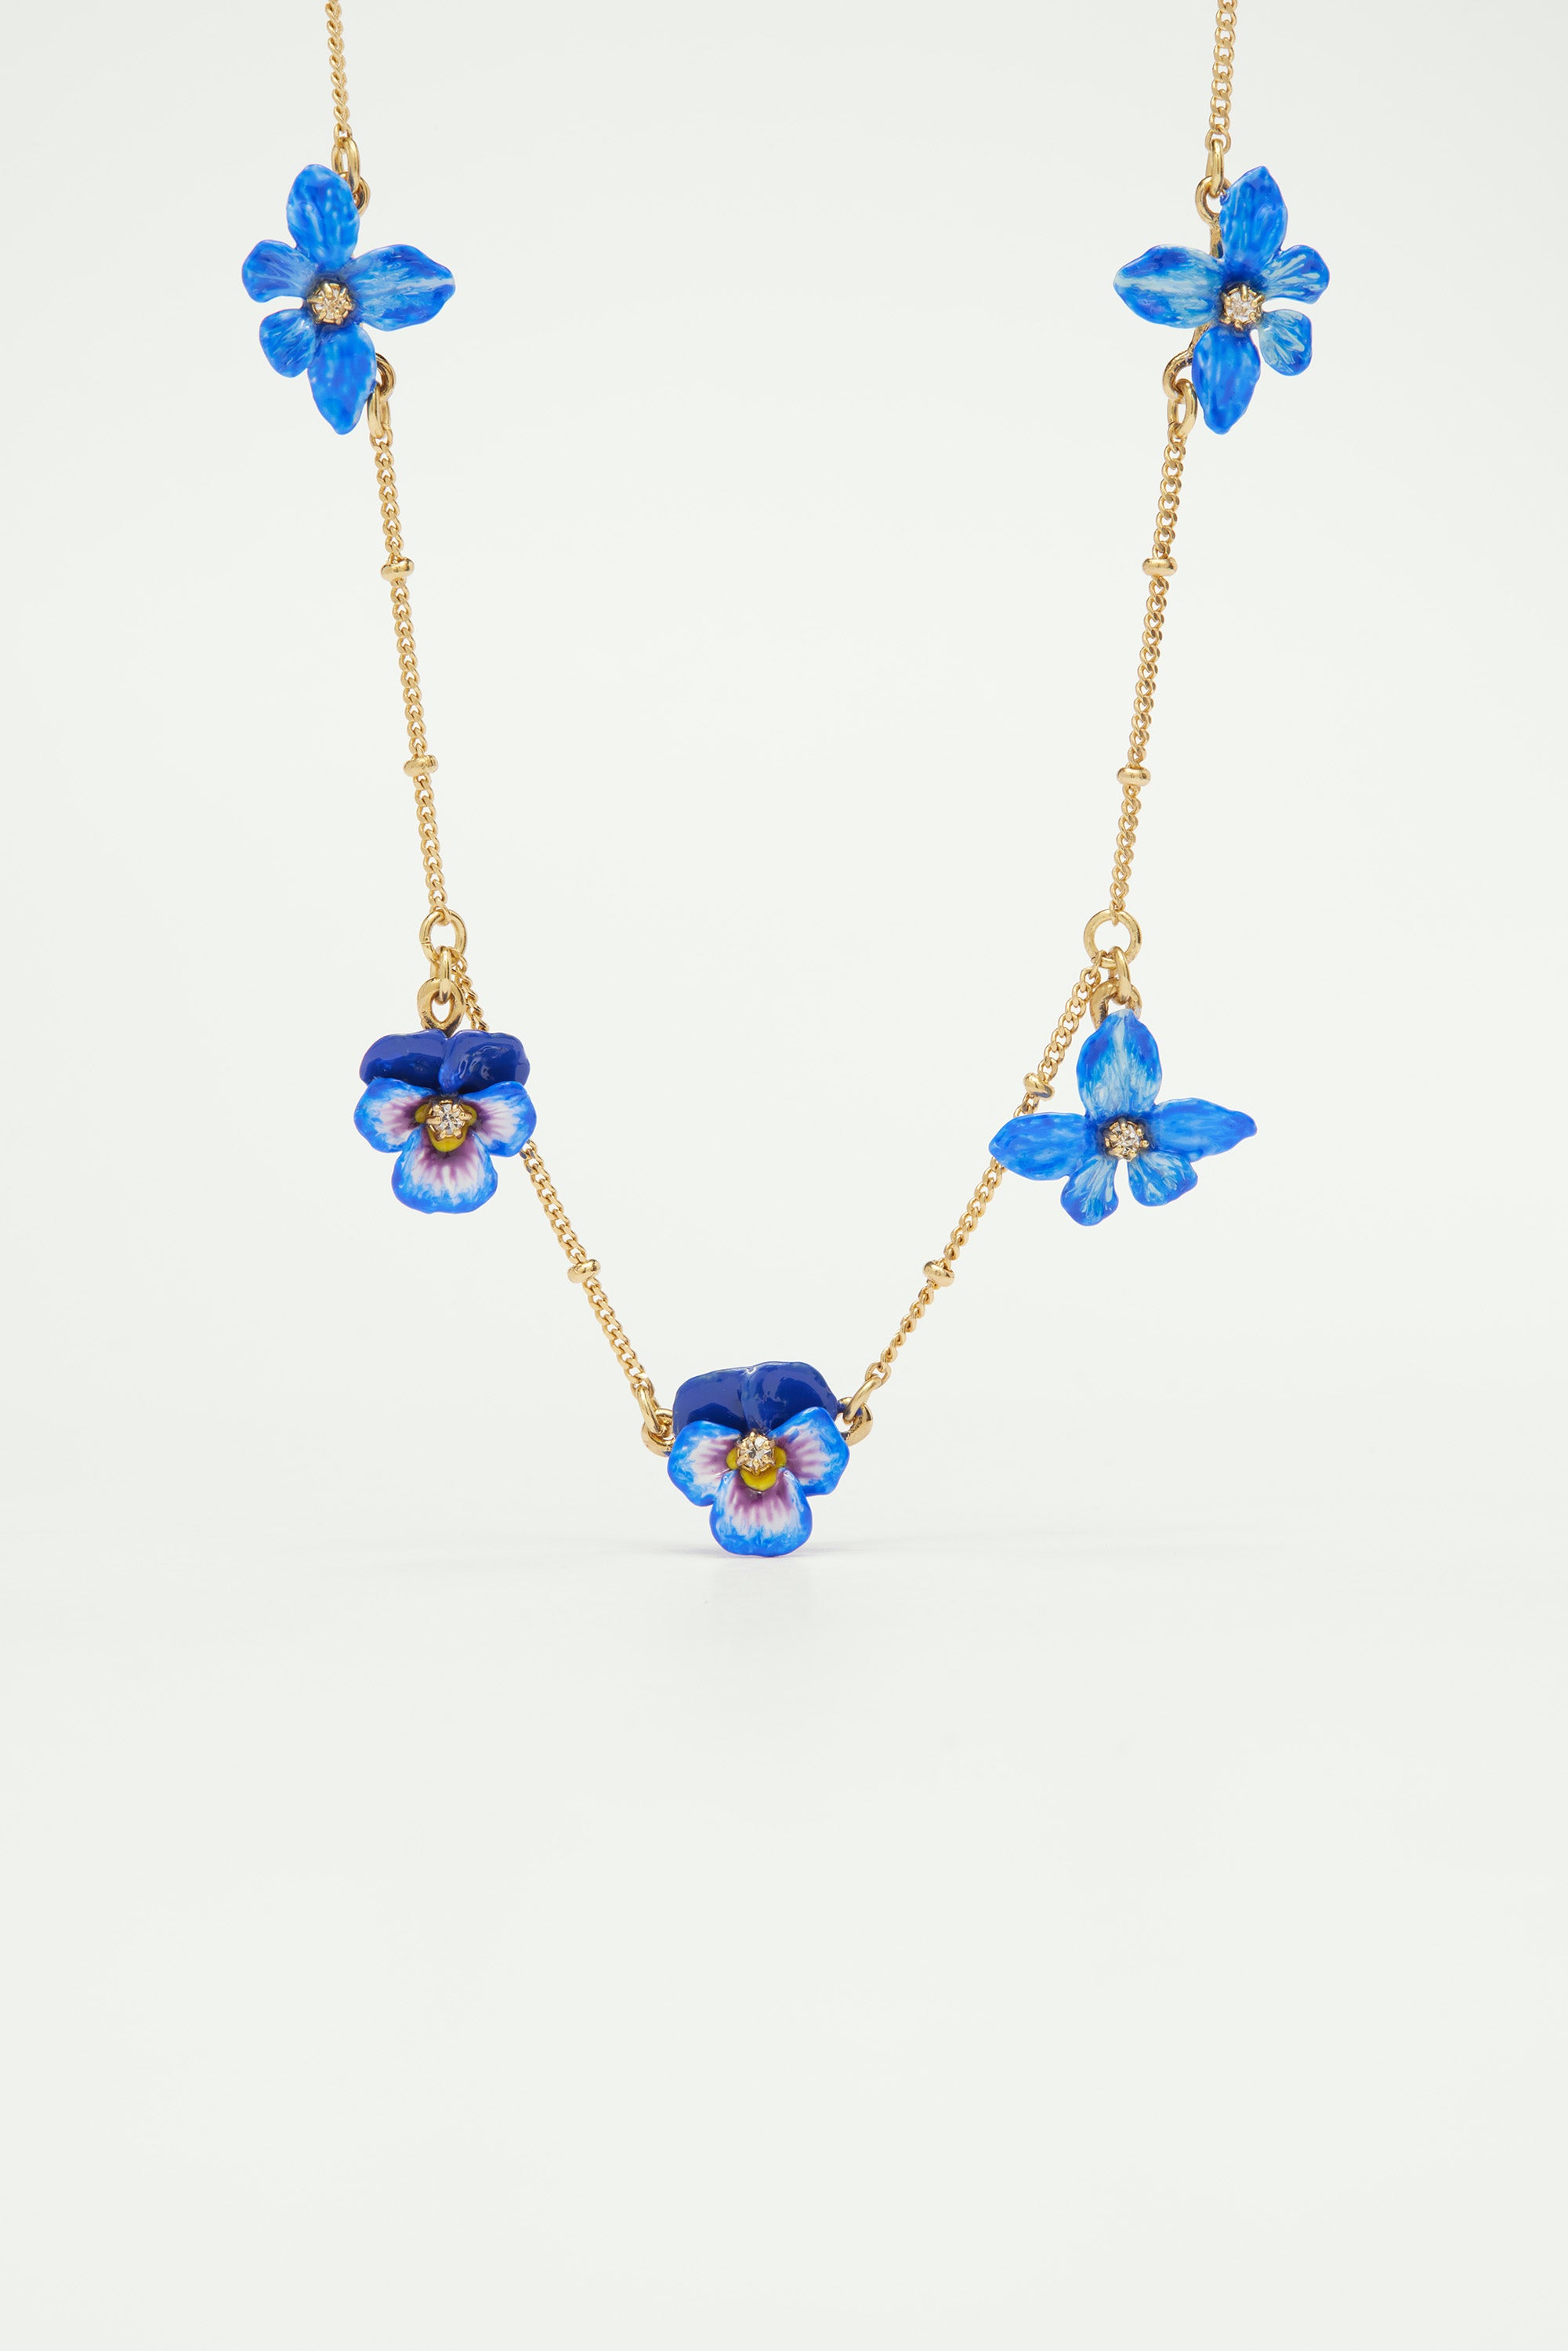 Violet, pansy and golden beads thin necklace